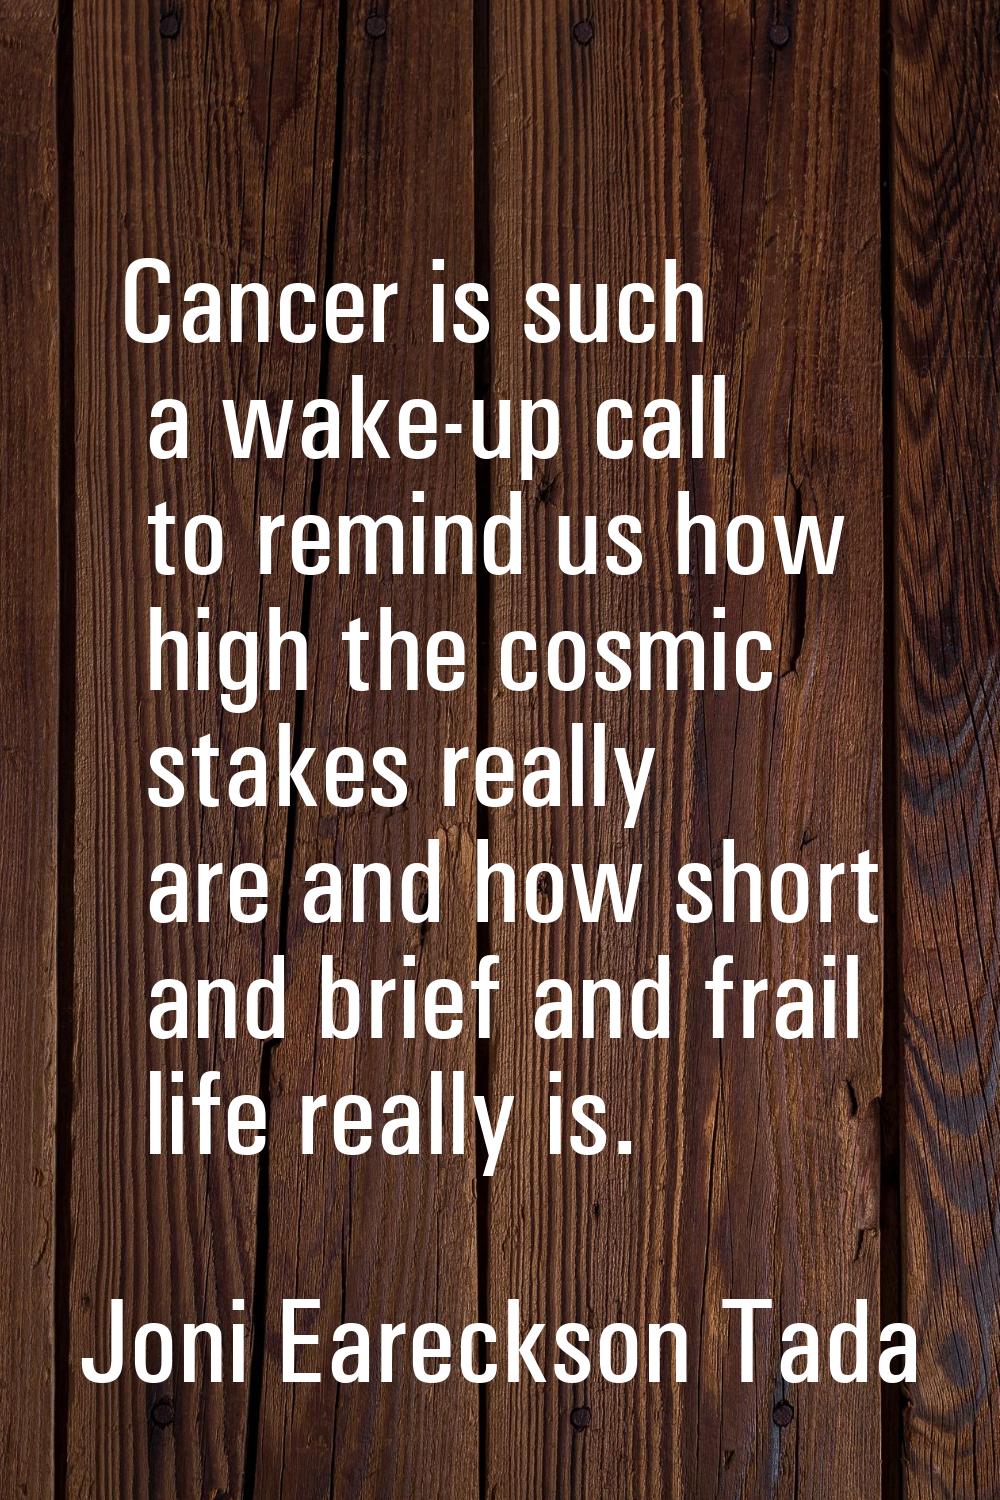 Cancer is such a wake-up call to remind us how high the cosmic stakes really are and how short and 